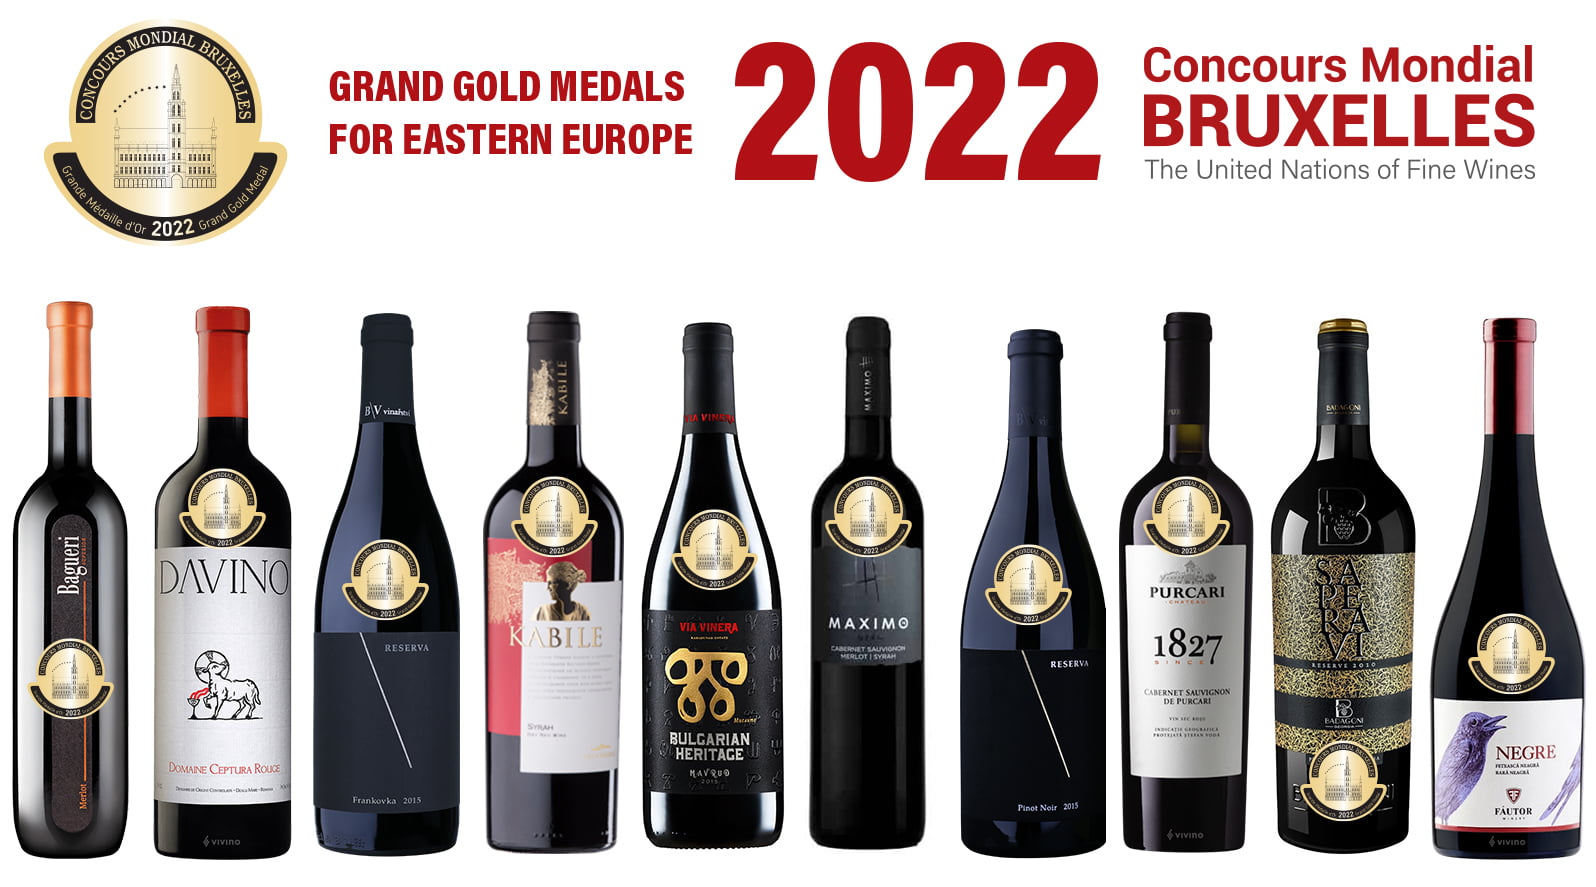 Eastern Europe delivers an excellent performance at the Red and White Session of the Concours Mondial de Bruxelles